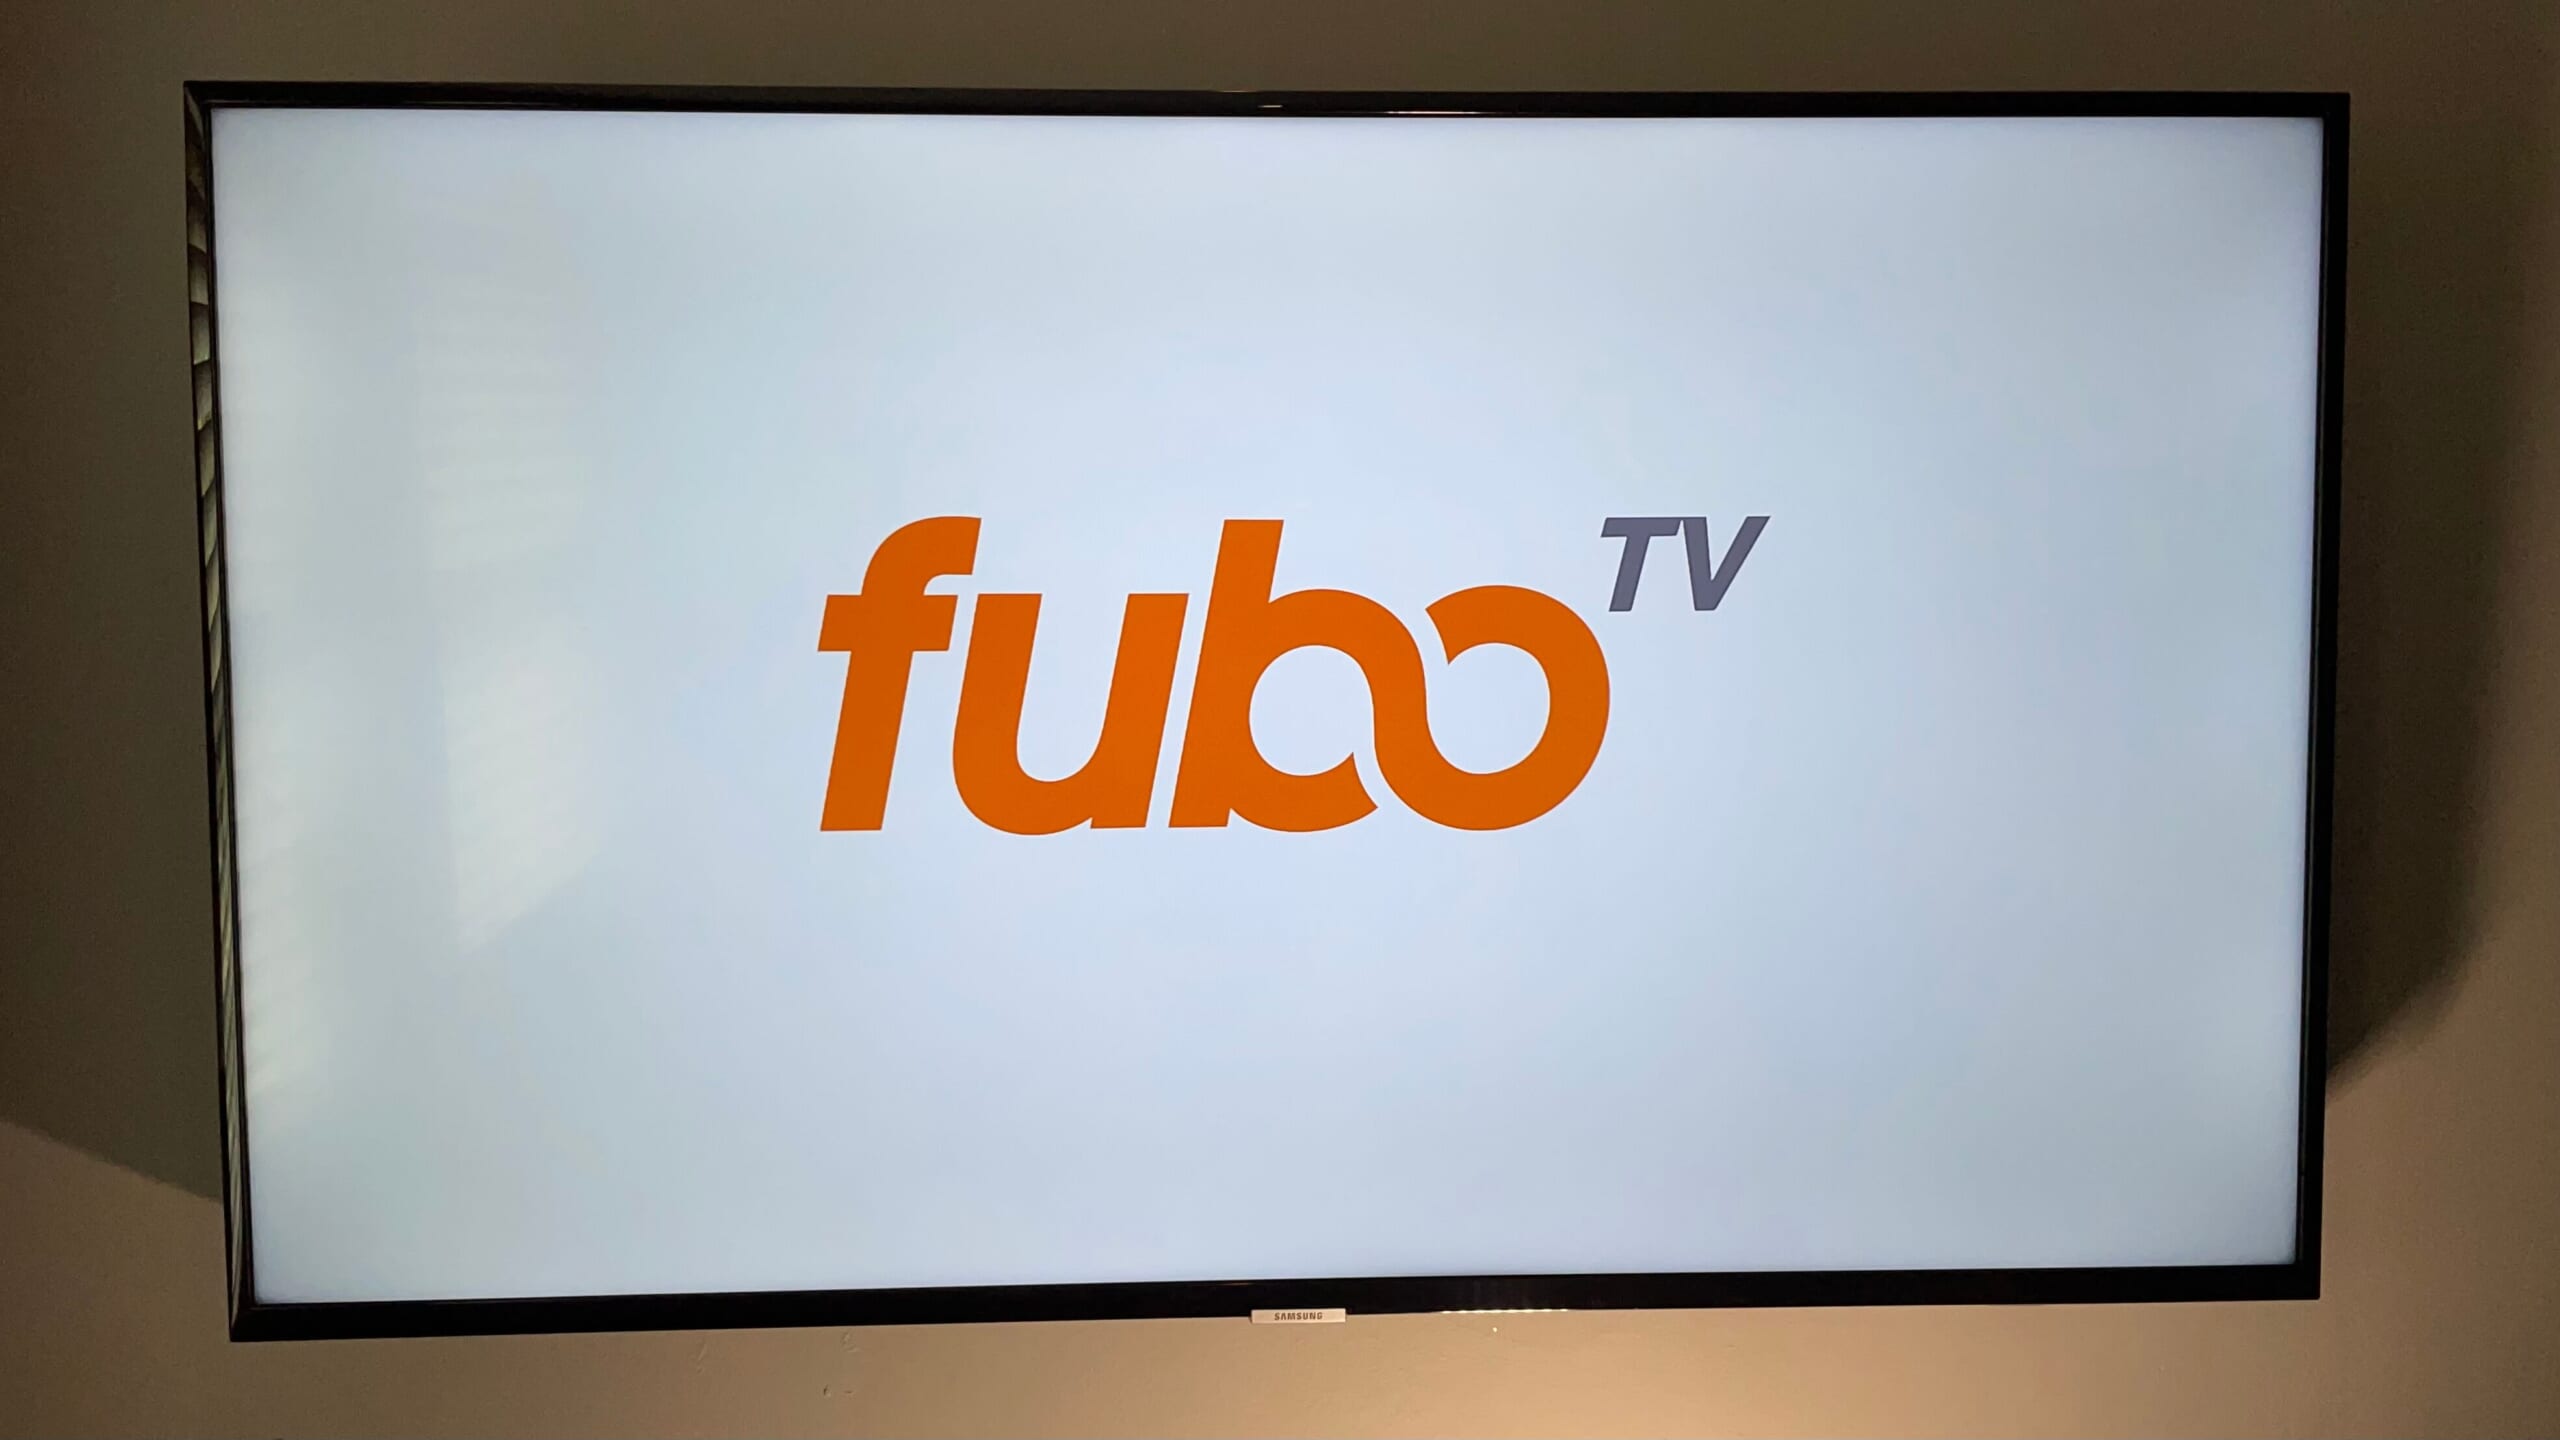 will the super bowl 2022 be on fubotv